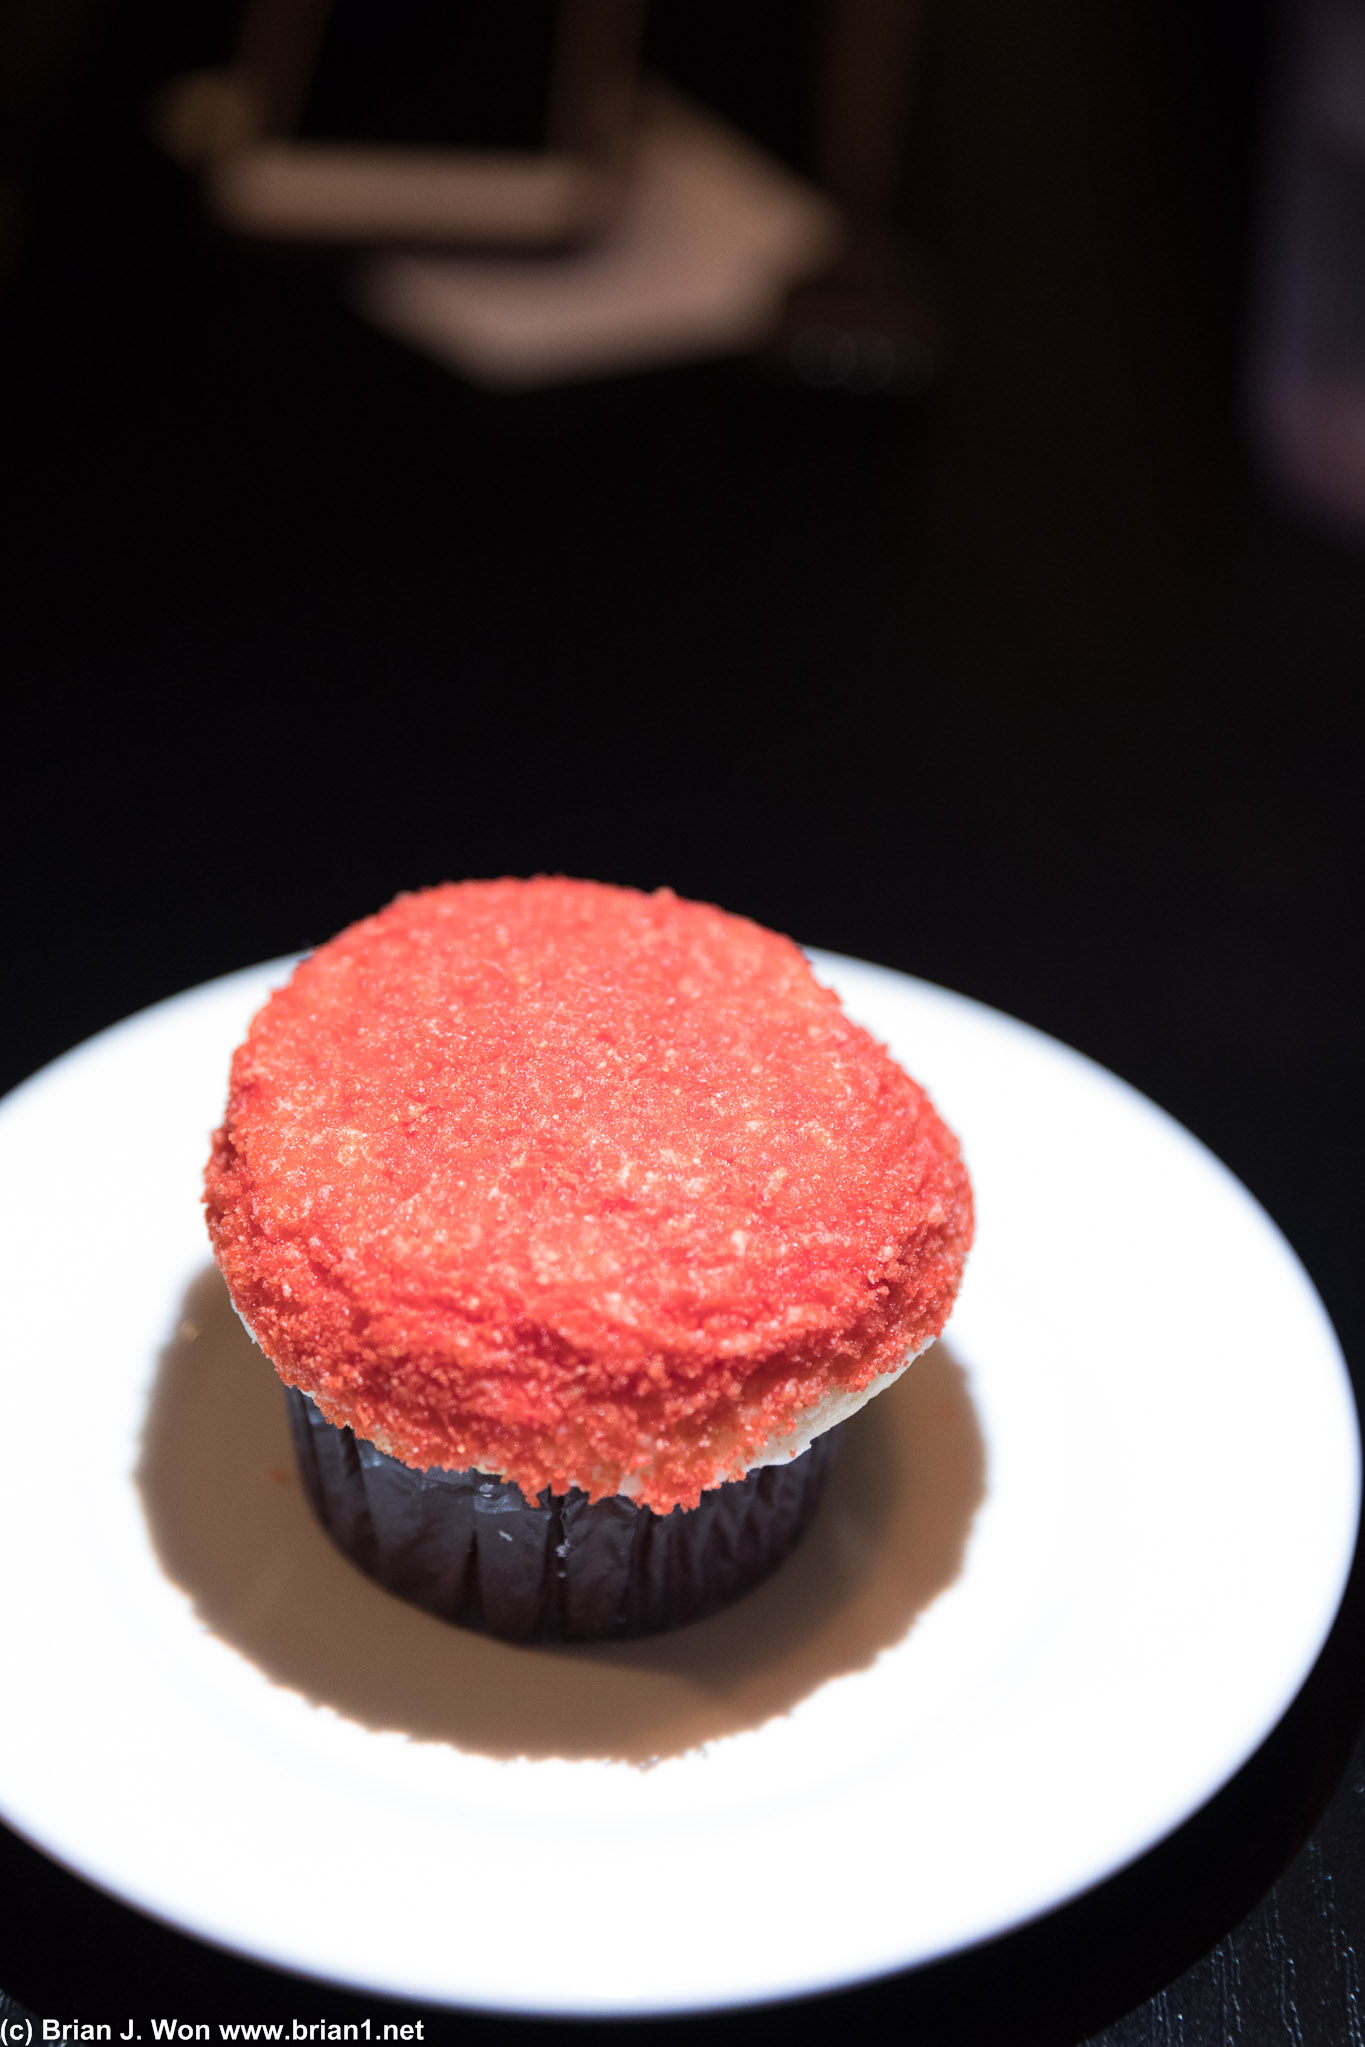 Hot cheetos cupcake from Sprinkle's.